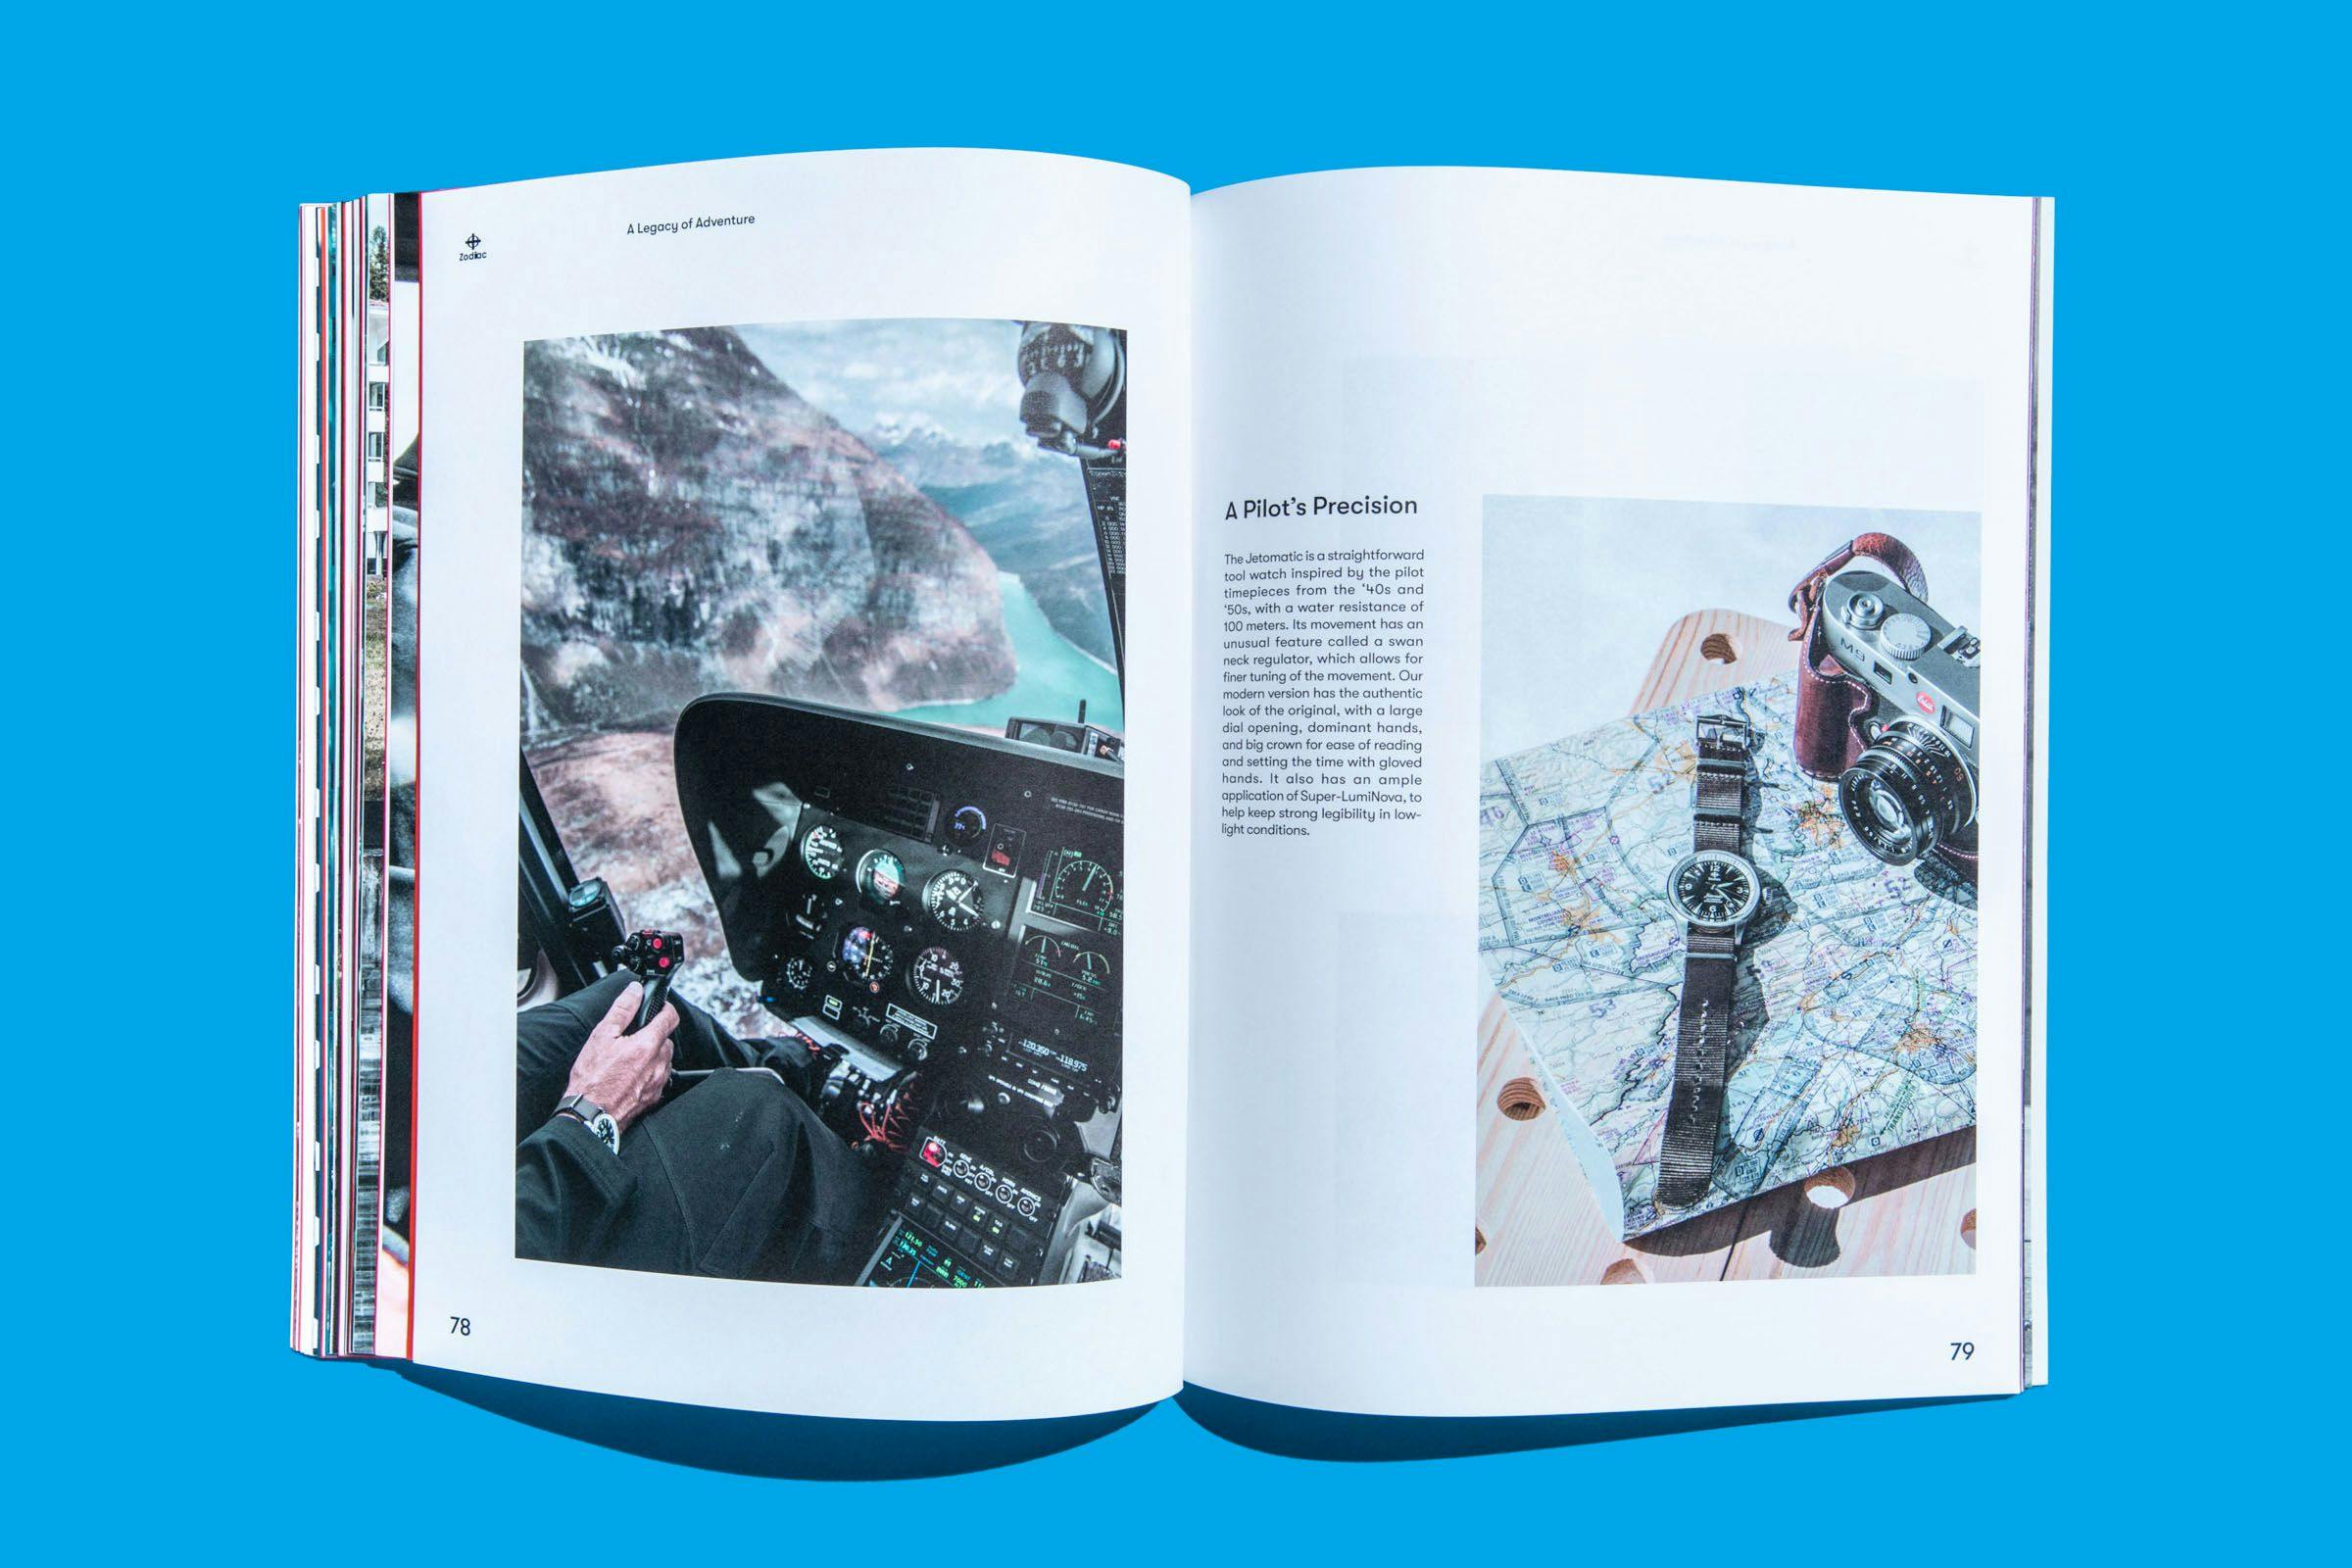 Pages from the Zodiac Watches: Brand Book showing a full sized photo of a pilot and a Zodiac Watch